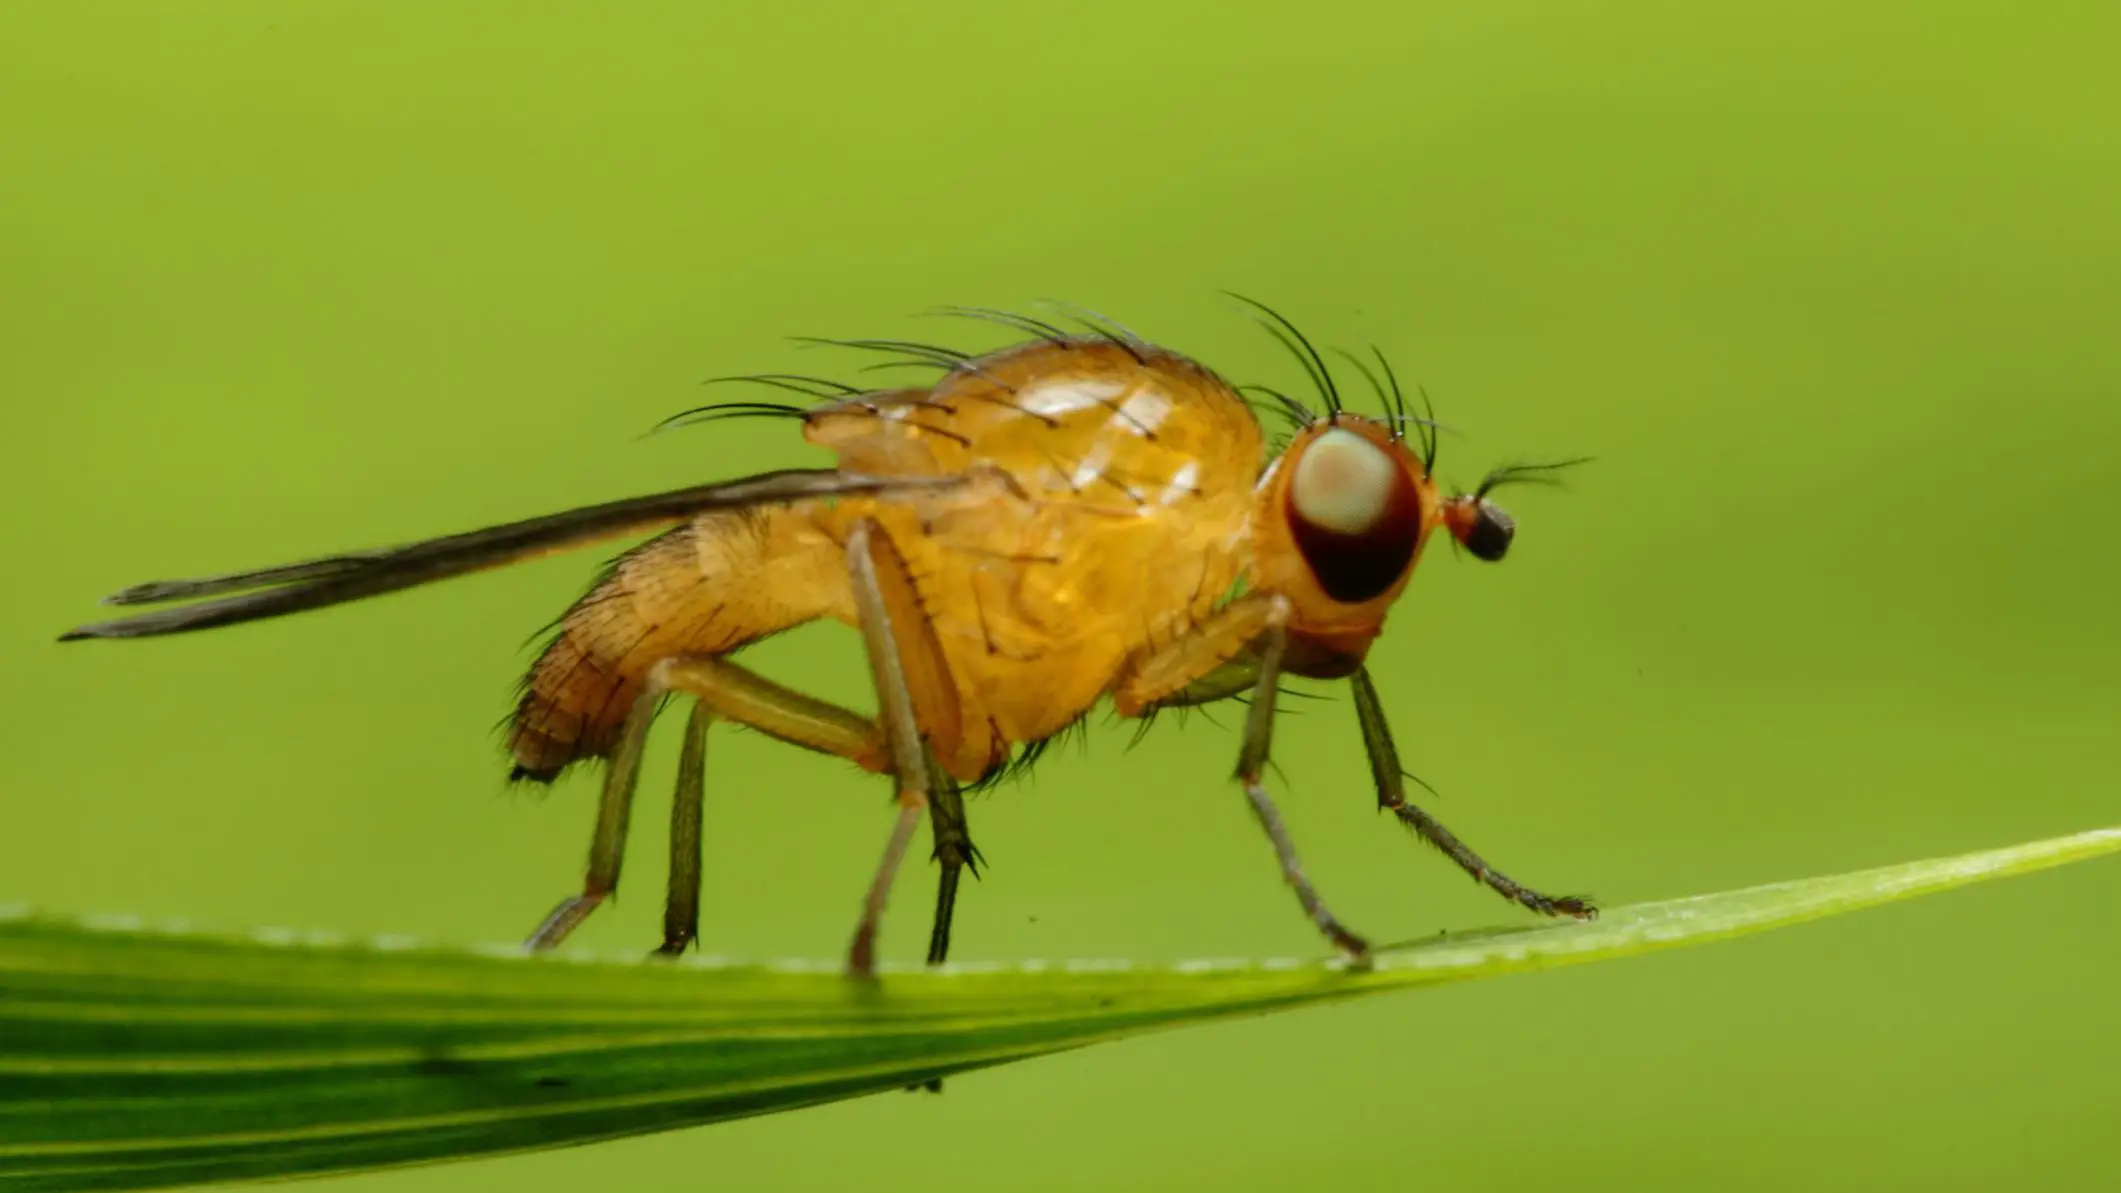 Differences between Gnats and Fruit Flies